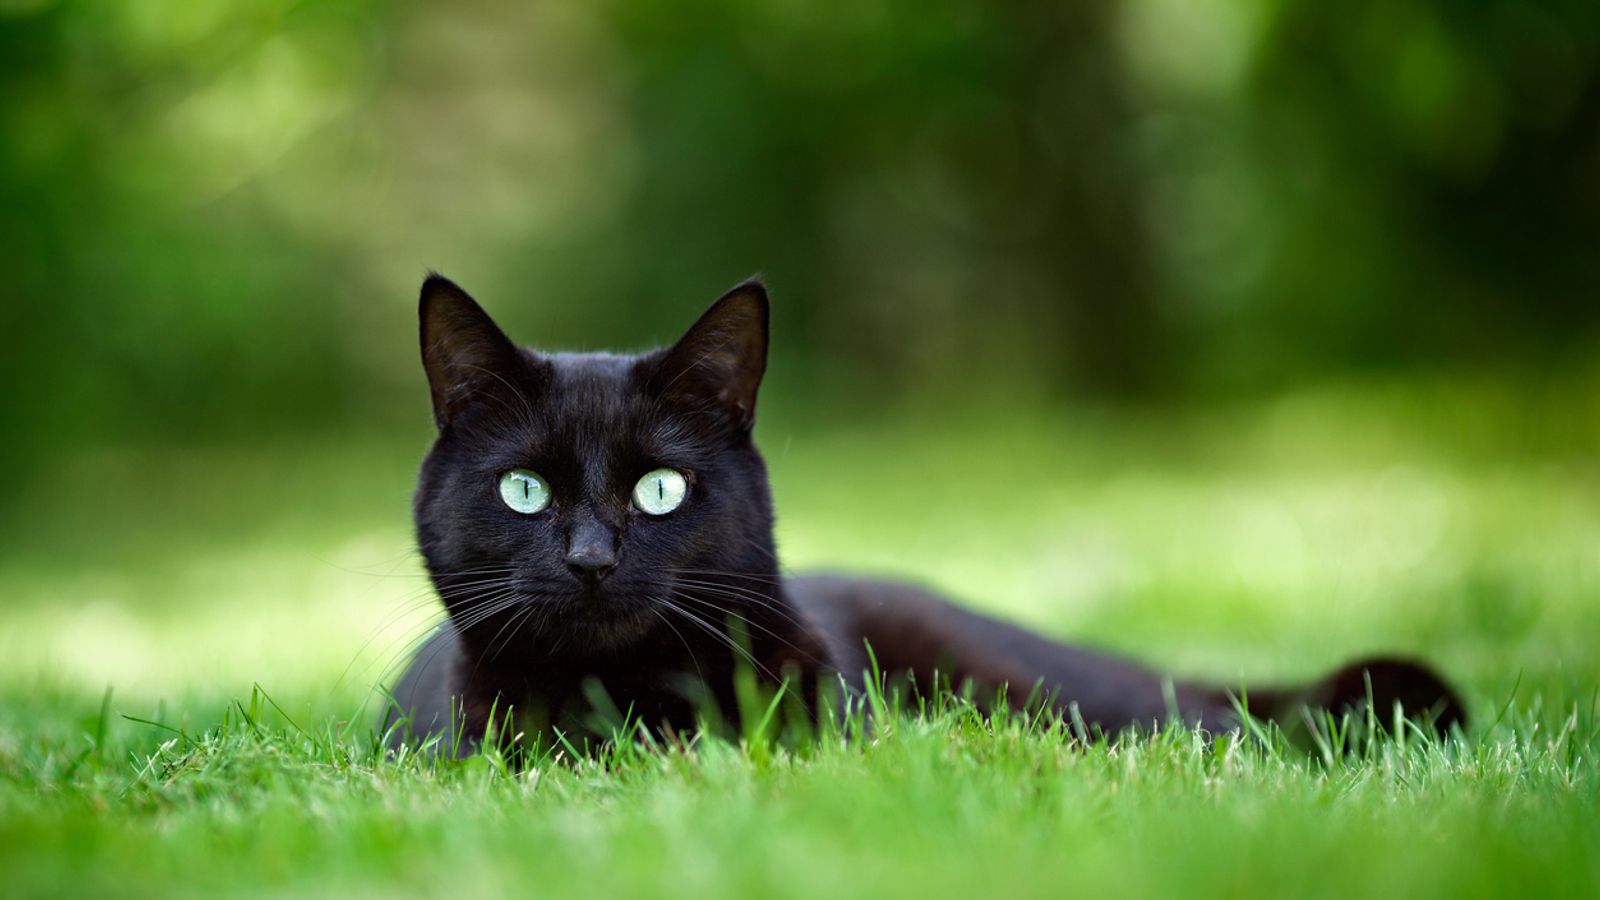 Black cat lying in grass and looking directly at the camera.